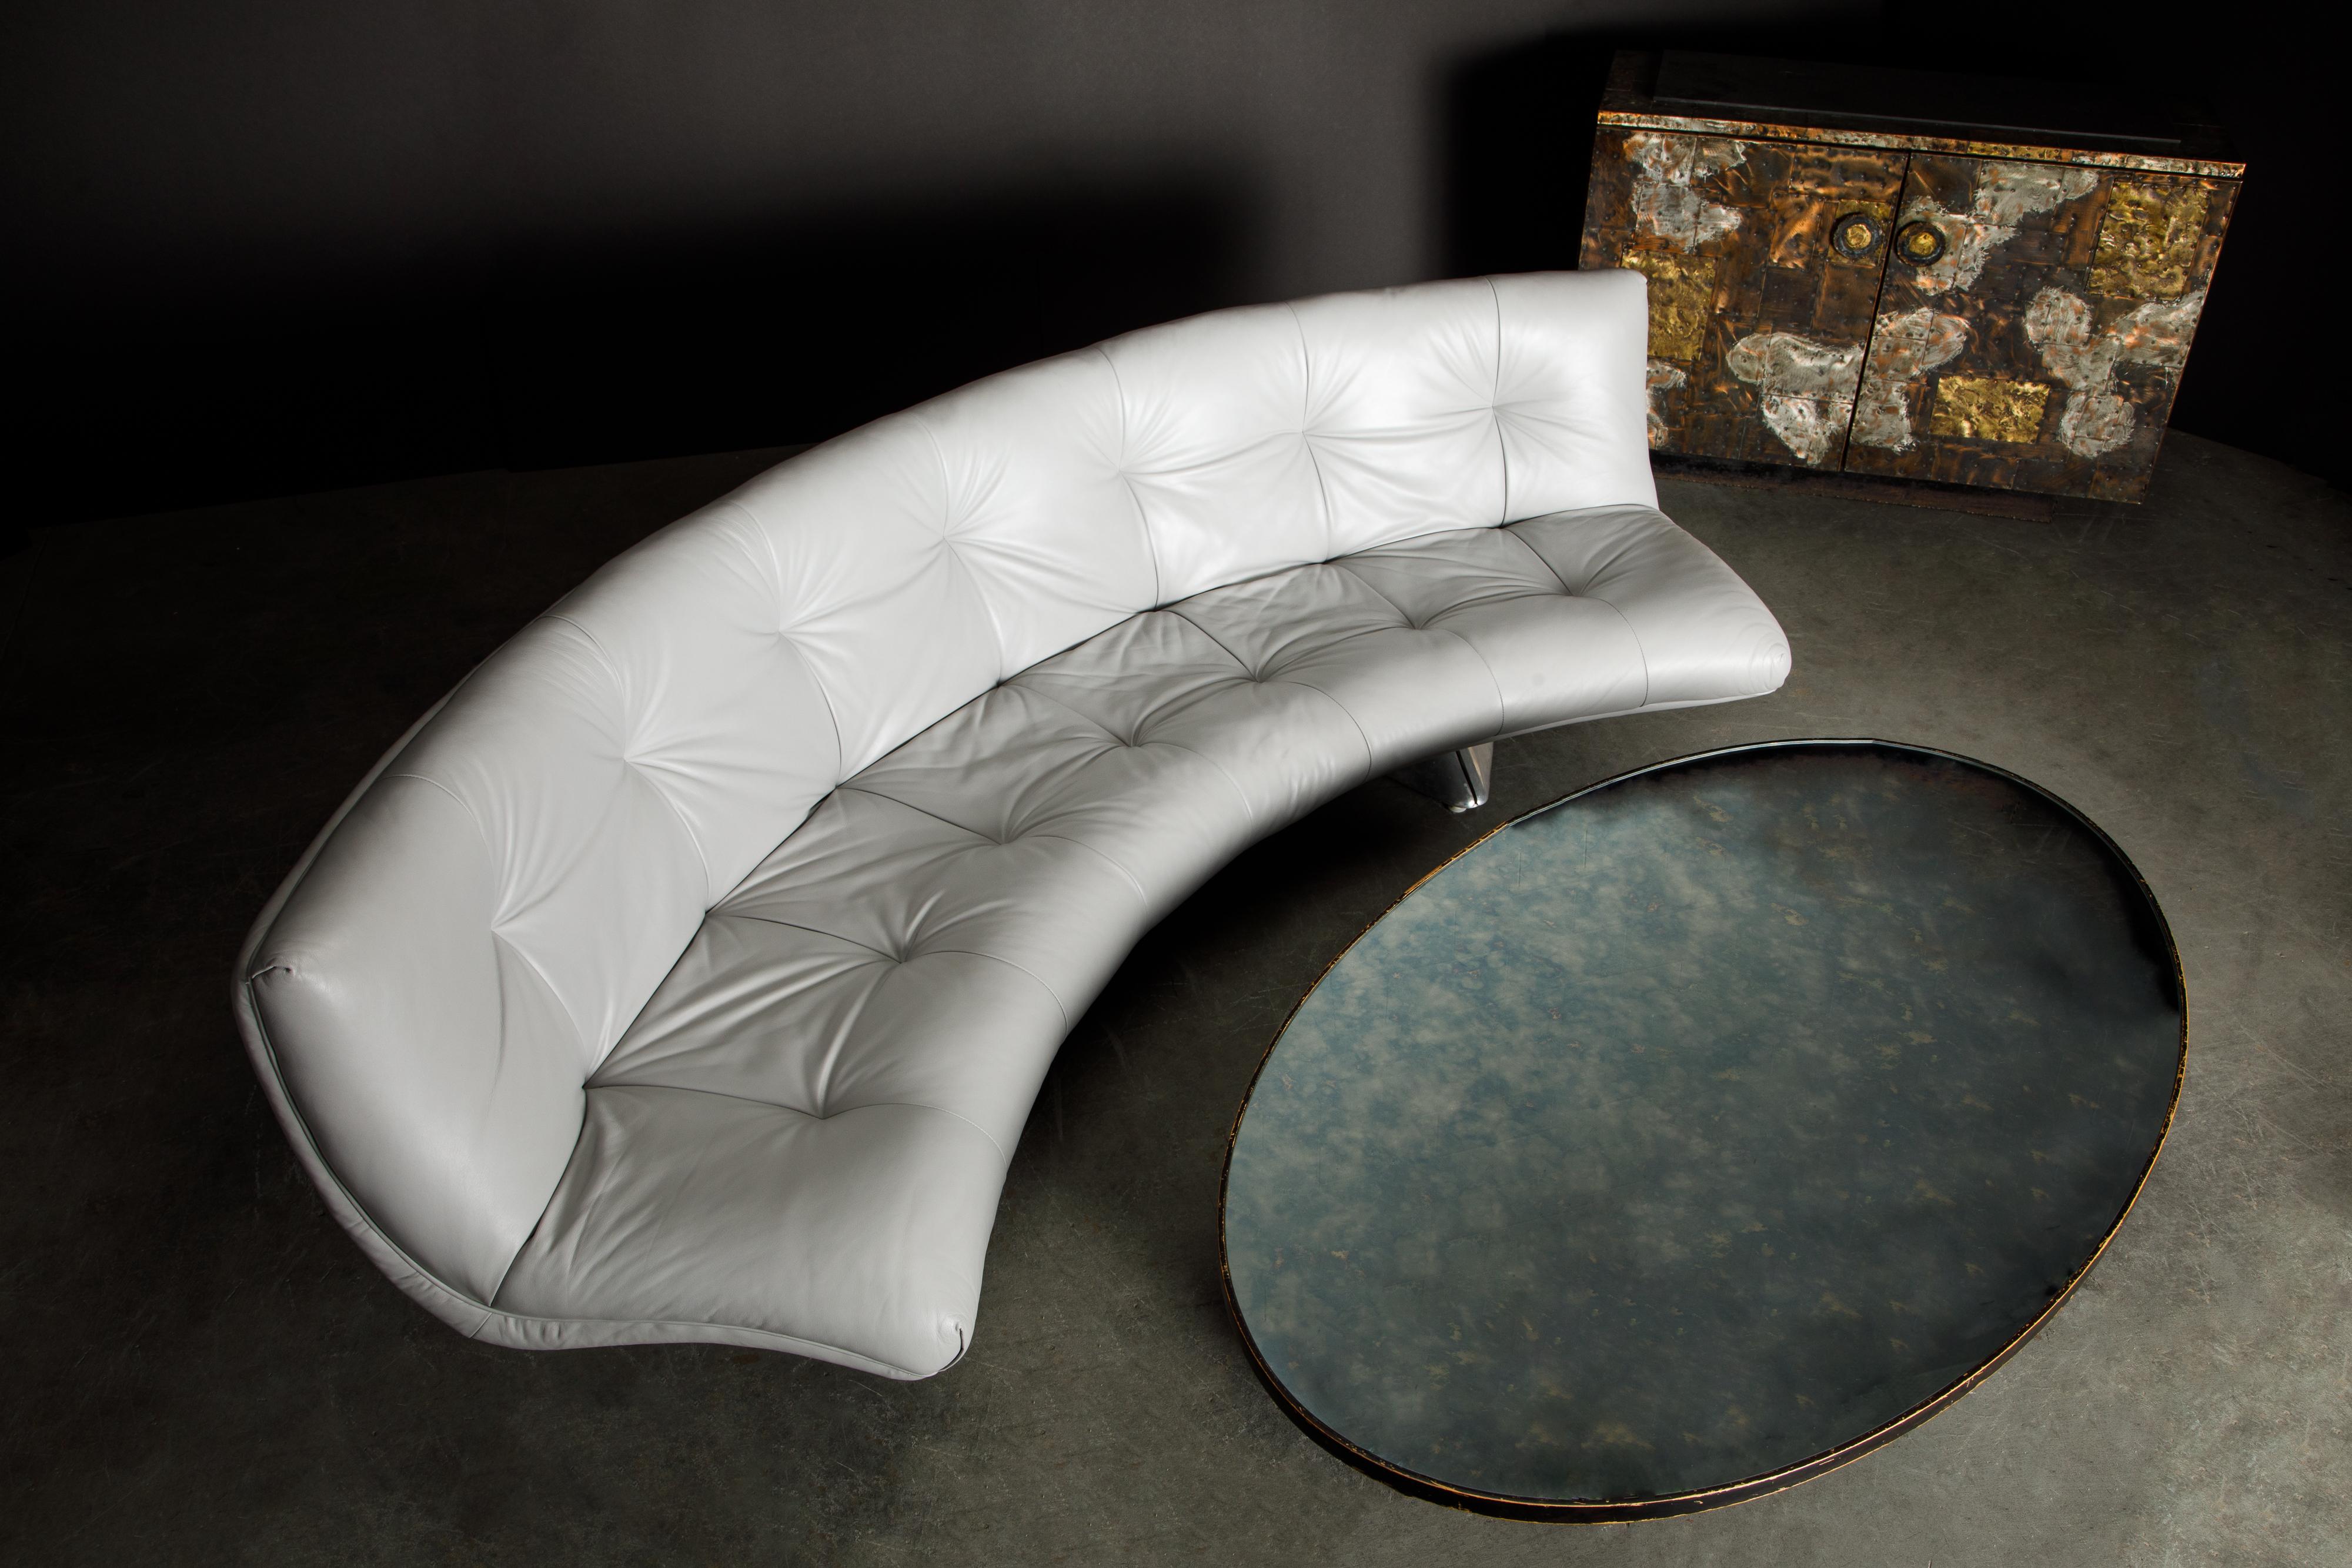 Rare 'Unicorn' Leather and Aluminum Curved Sofa by Vladimir Kagan, c. 1963 For Sale 9